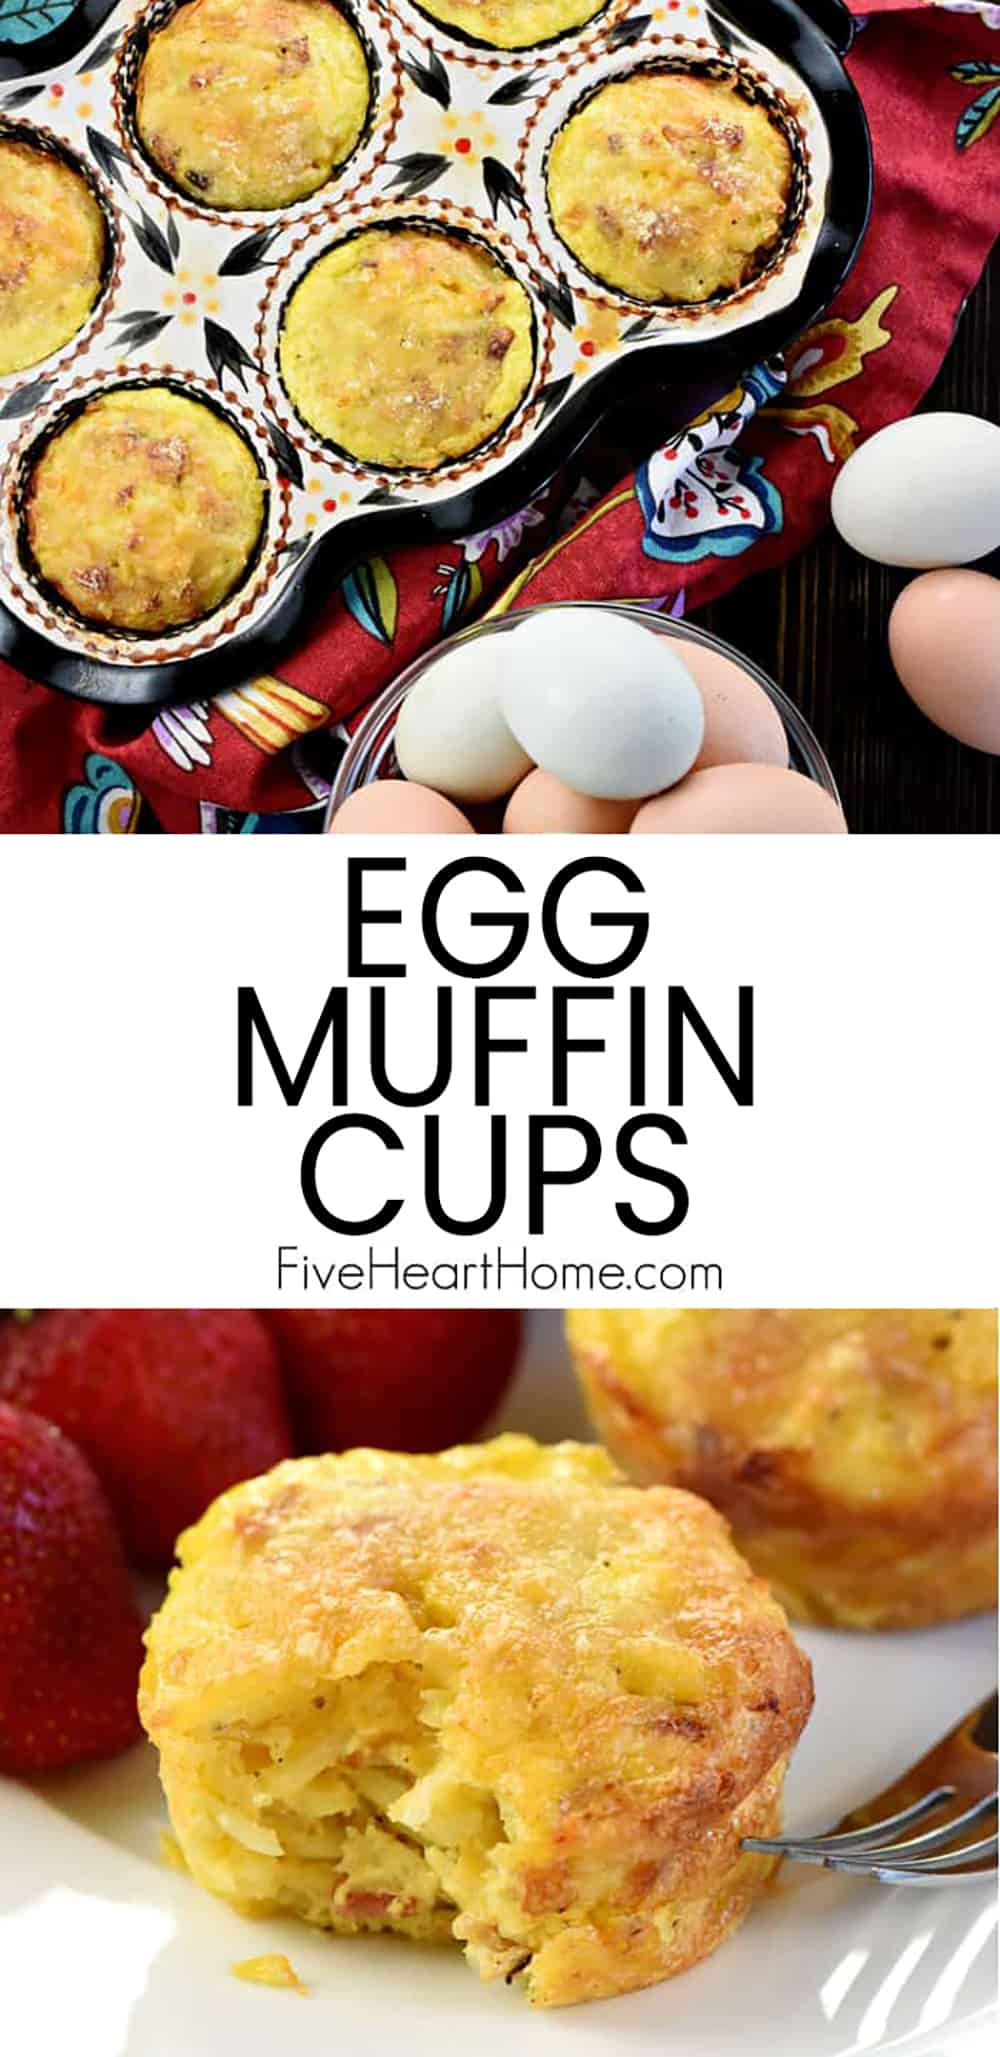 Egg Muffin Cups ~ savory mini frittatas featuring fluffy eggs, crispy diced bacon, hash browns, and grated cheddar, baked in muffin pans for a filling and protein-packed breakfast or brunch! | FiveHeartHome.com via @fivehearthome